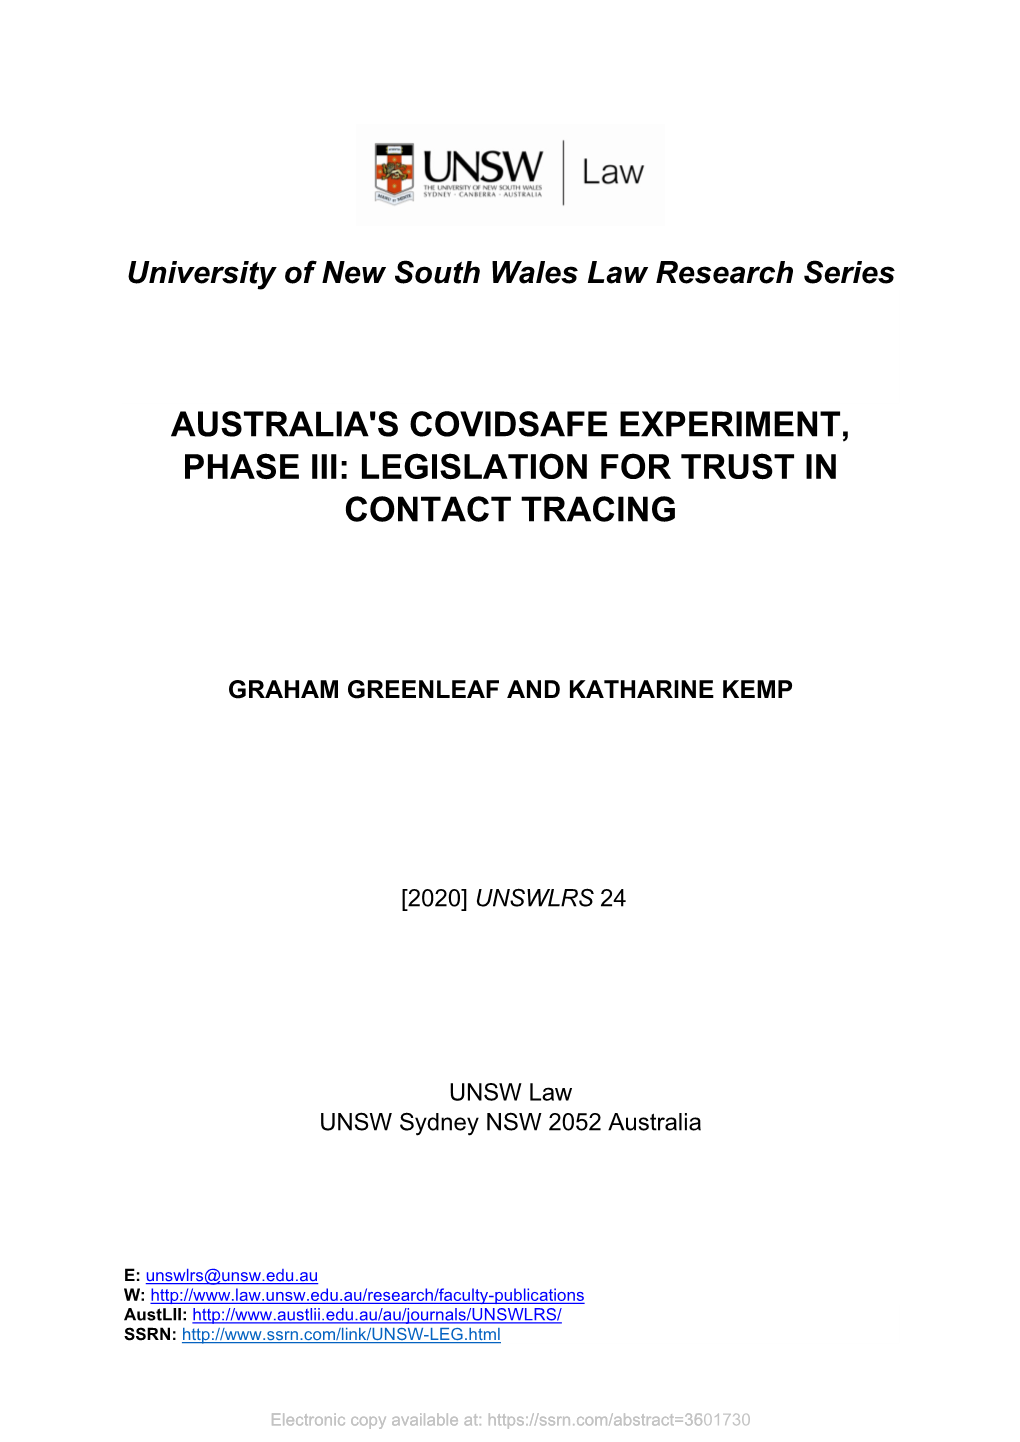 Australia's Covidsafe Experiment, Phase Iii: Legislation for Trust in Contact Tracing